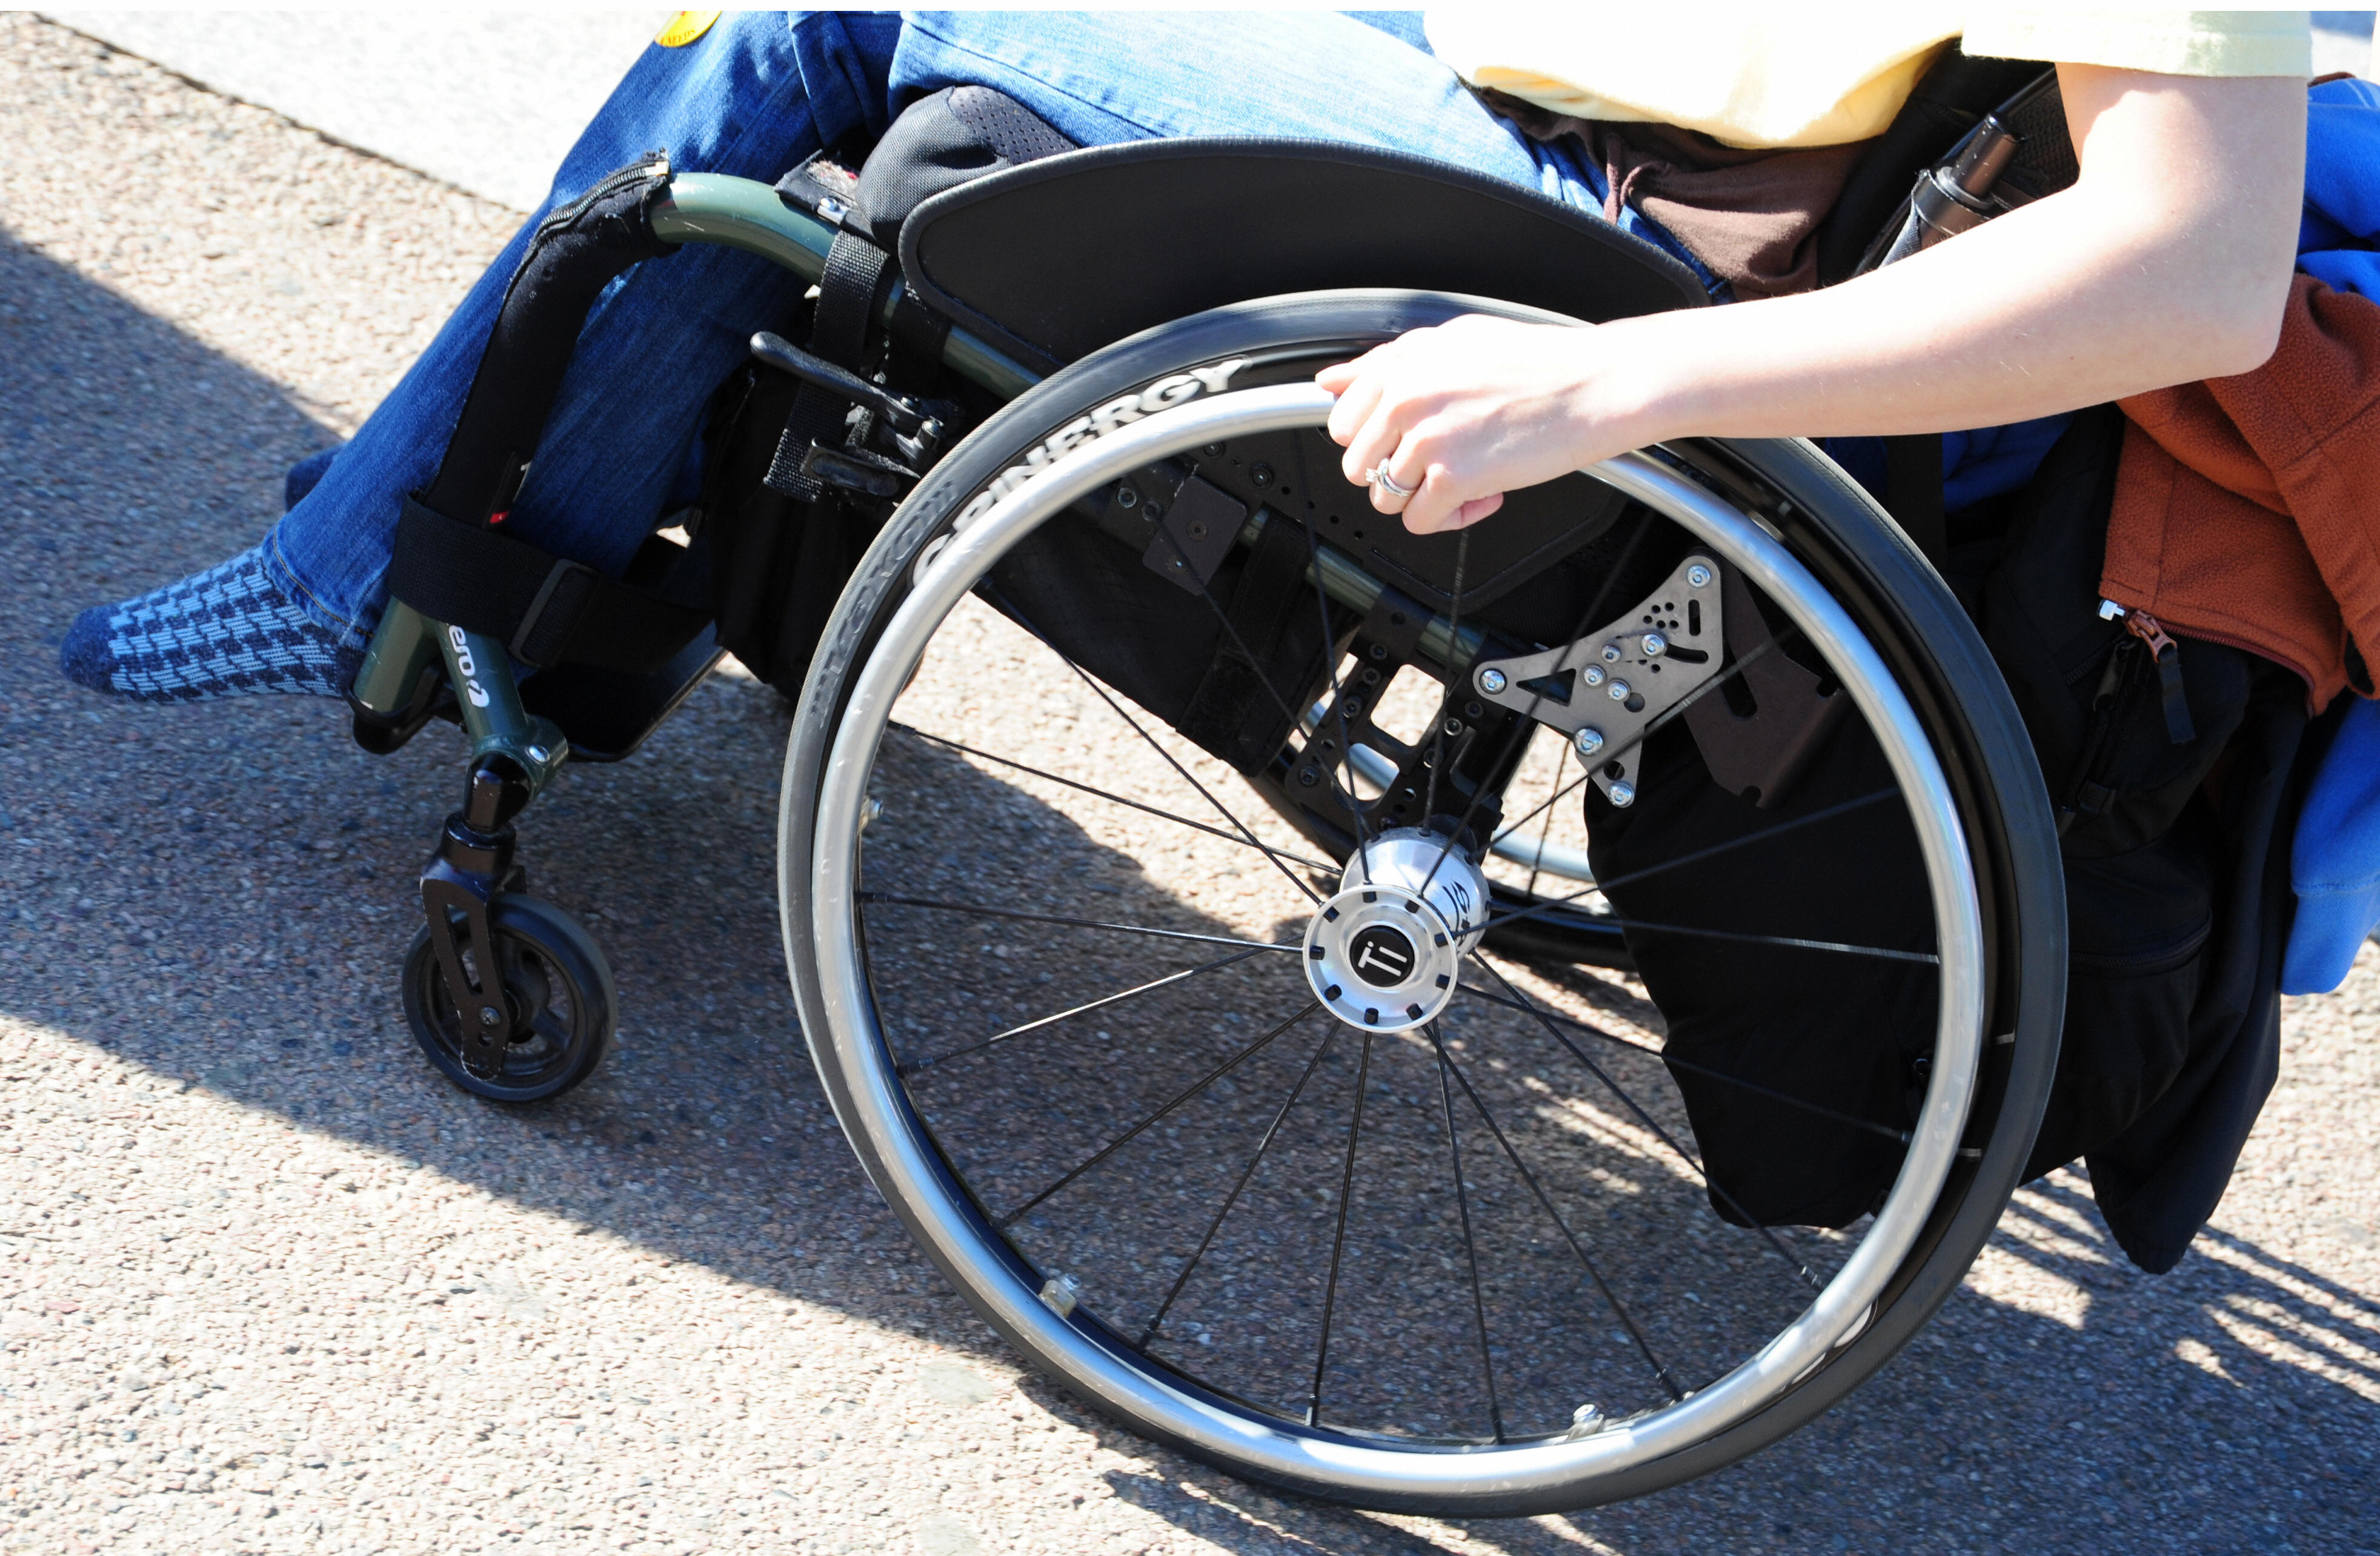 The Best and Worst Cities for People With Disabilities